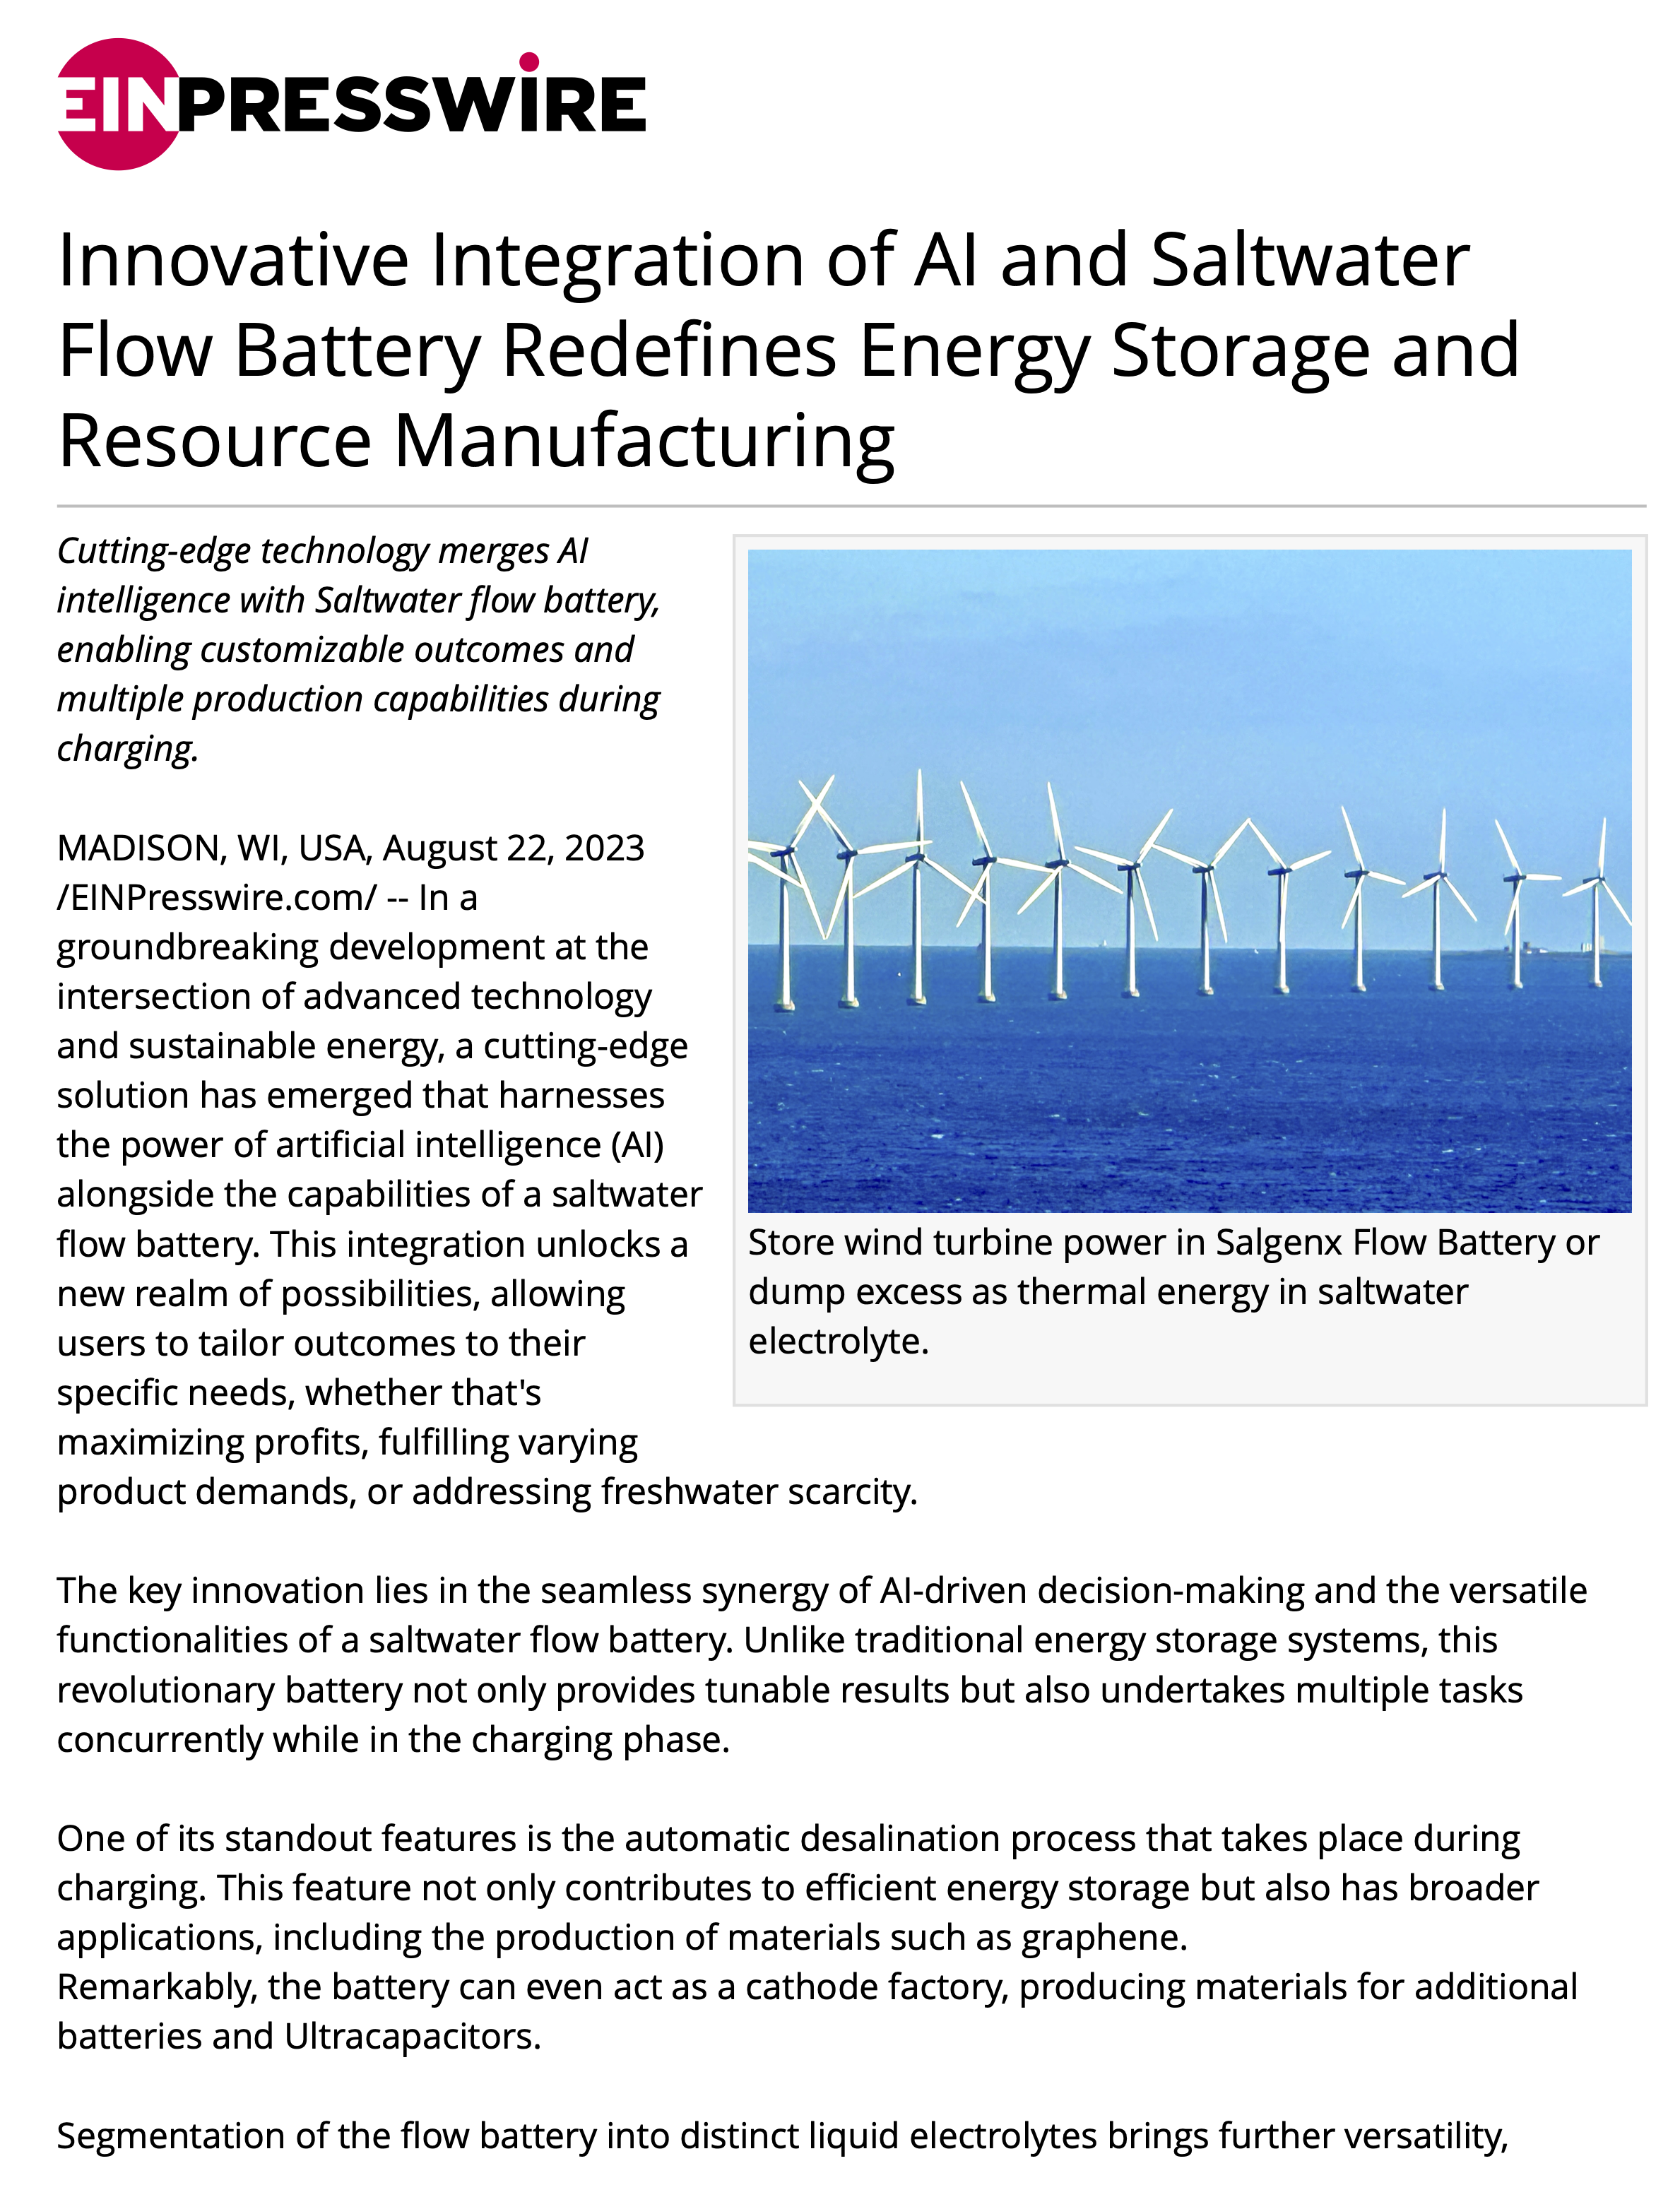 Innovative Integration of AI and Saltwater Flow Battery Redefines Energy Storage and Resource Manufacturing